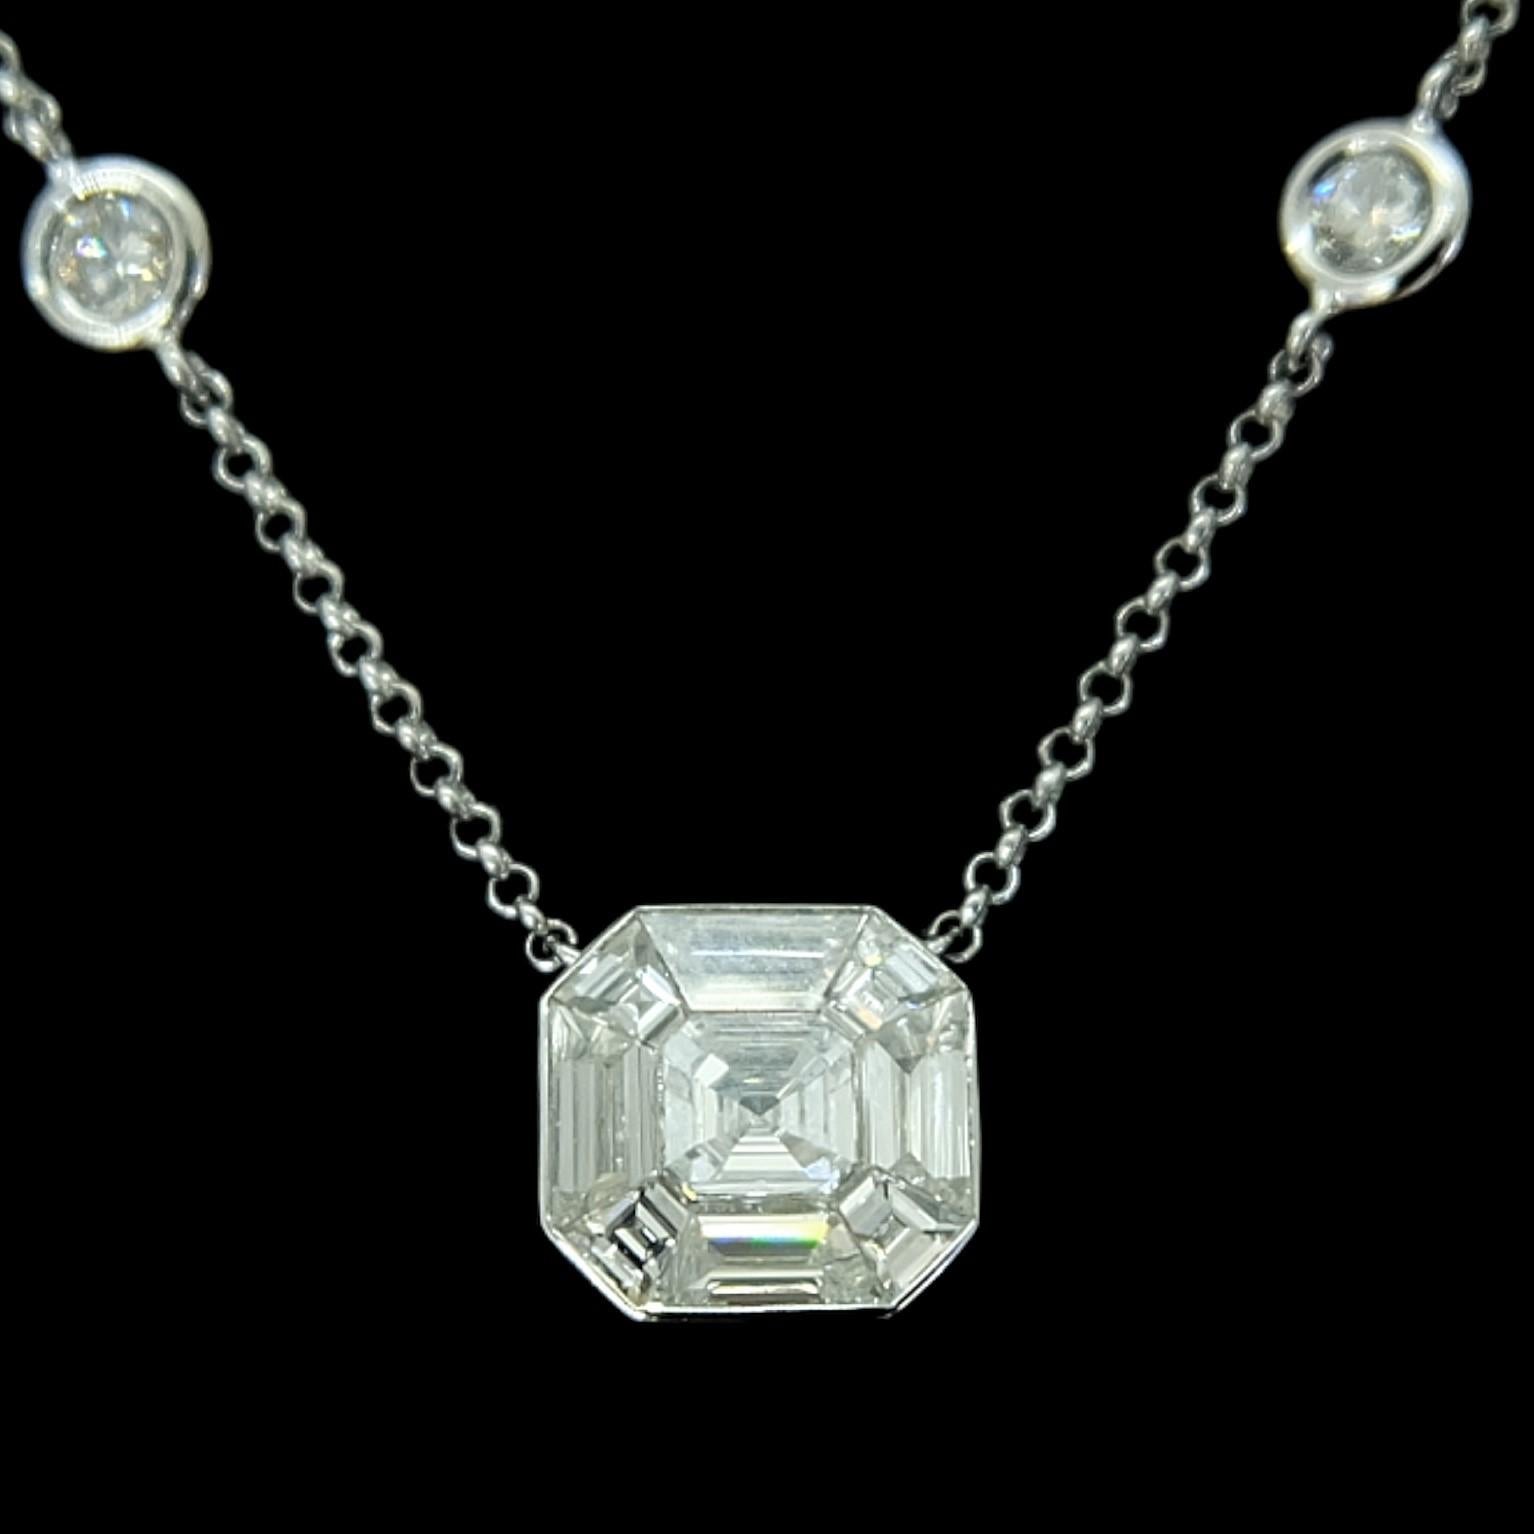 Sophia D. platinum necklace composed of 0.92 carat cushion cut diamond pendant and 6 round diamonds with a total weight of 0.56 carats. The necklace length is 9